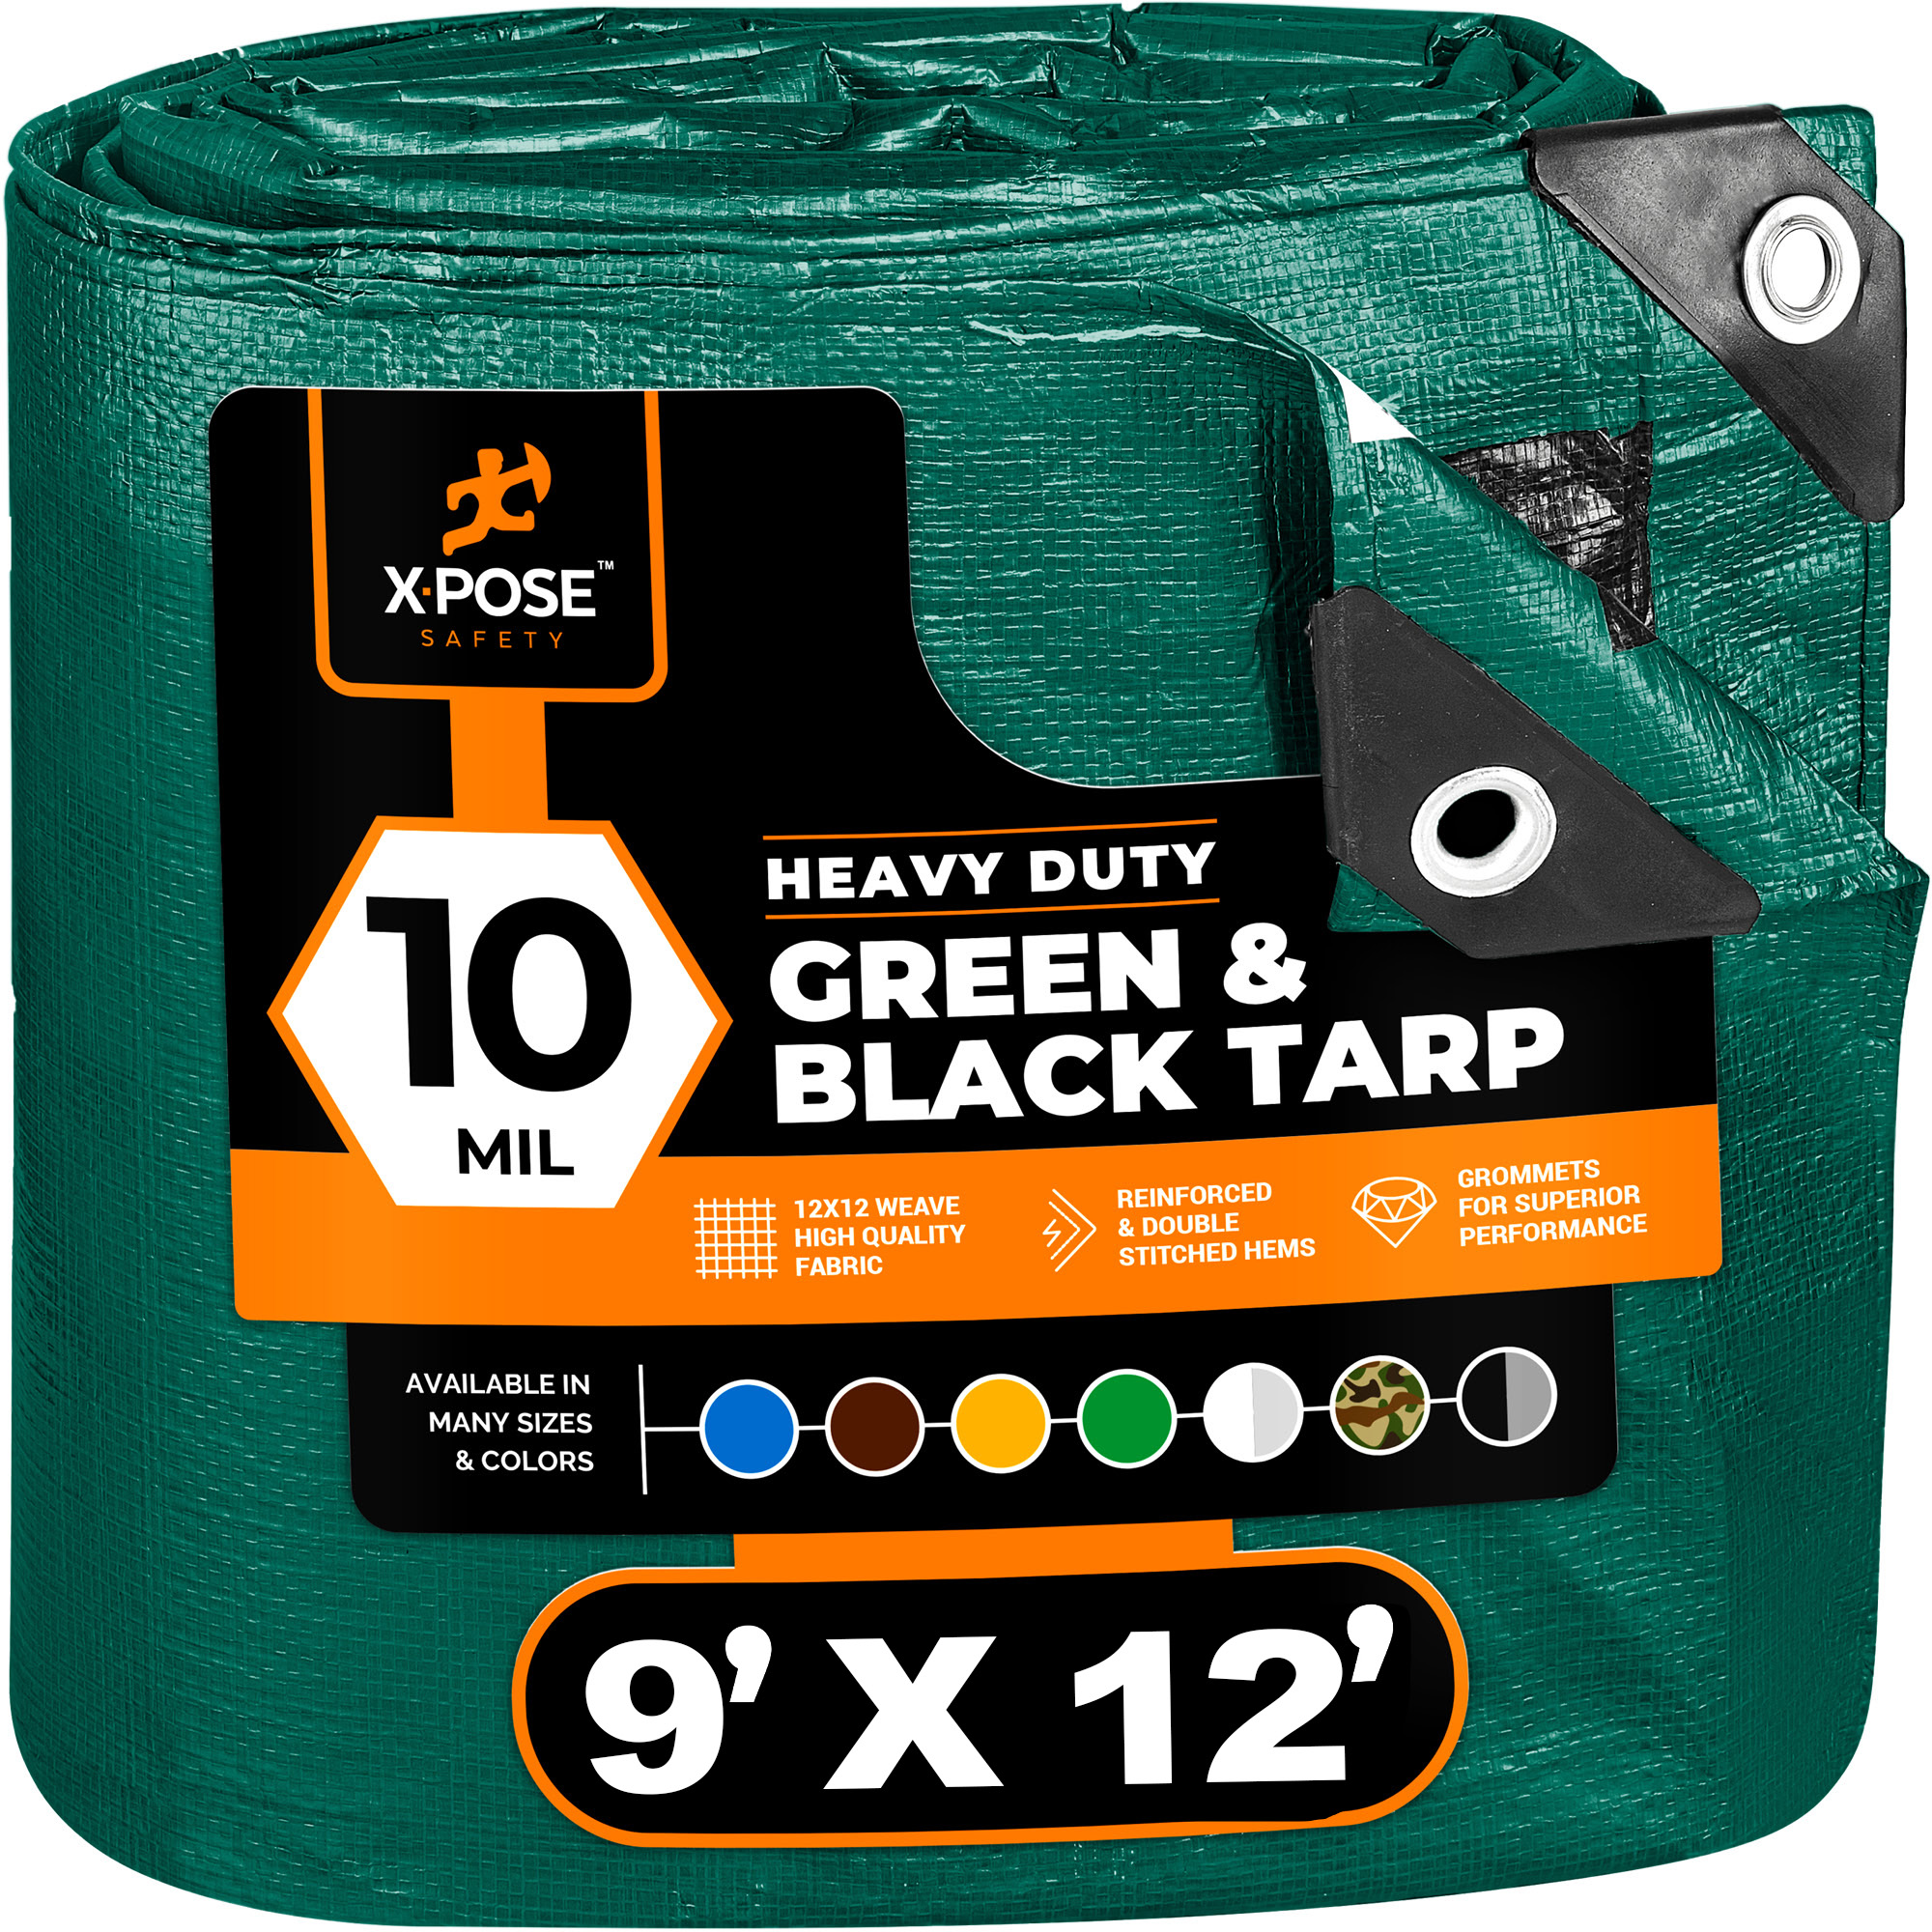 Heavy Duty Poly Tarp 9 Feet x 12 Feet 10 Mil Thick Waterproof, UV Blocking Protective Cover - Reversible Green and Black - Laminated Coating - Rustproof Grommets - by Xpose Safety - image 1 of 8